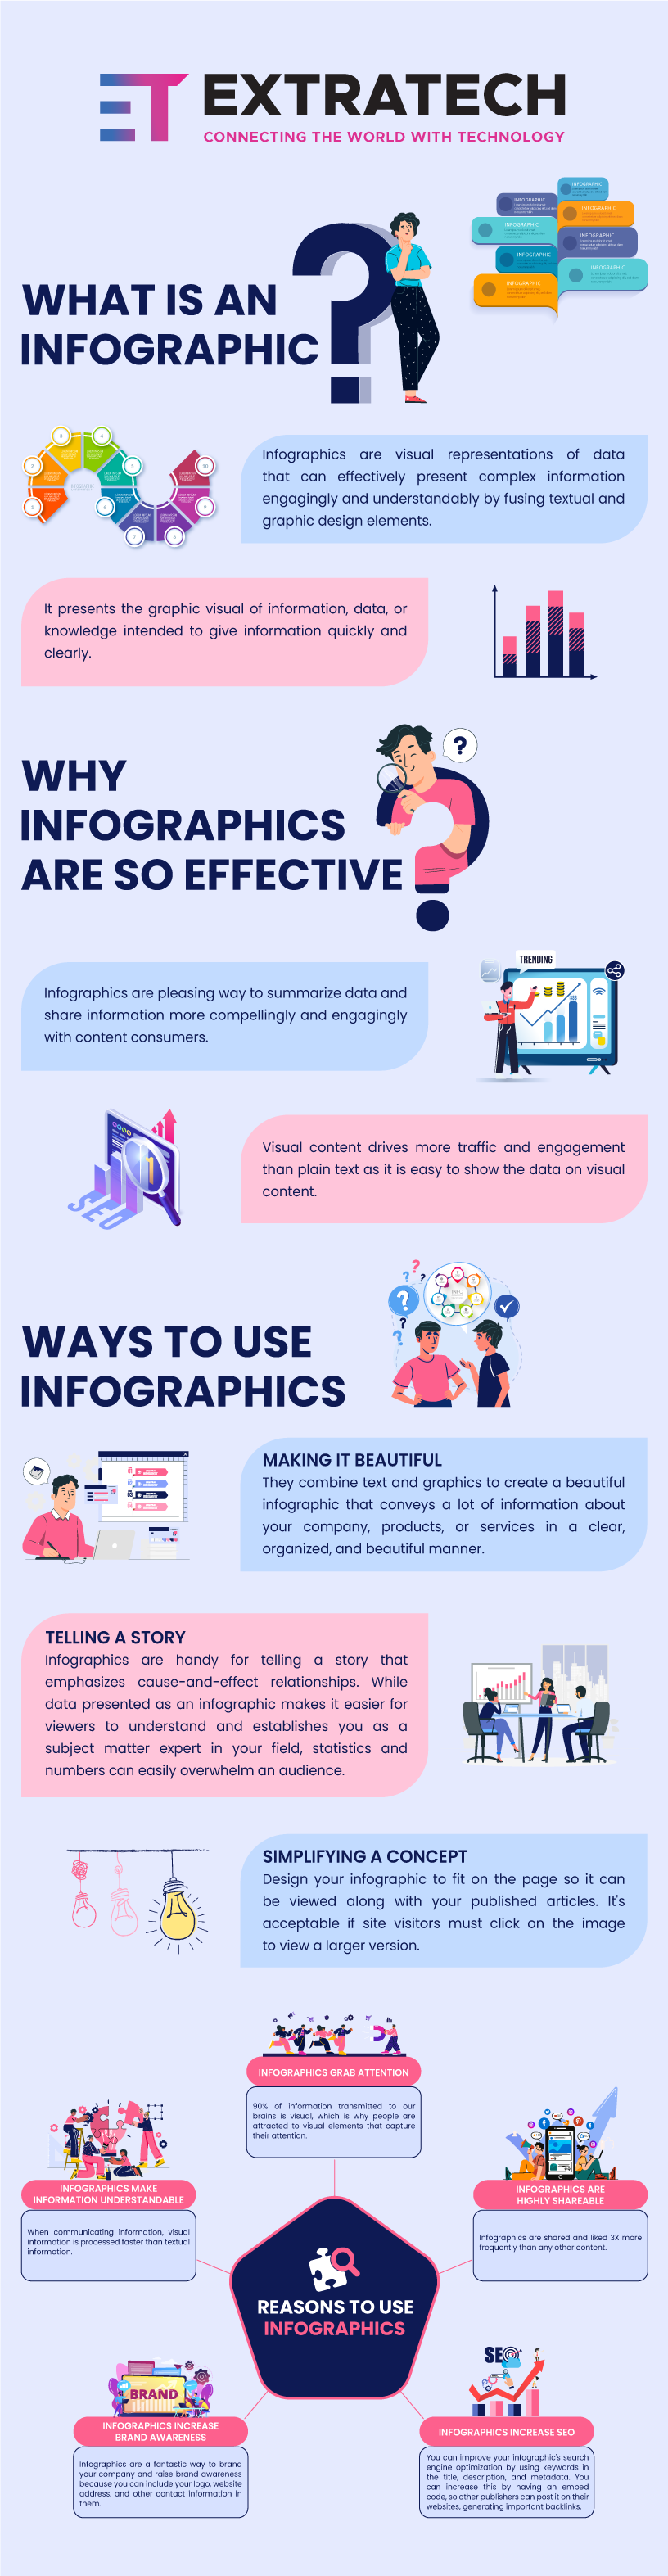 Why infographics are so effective